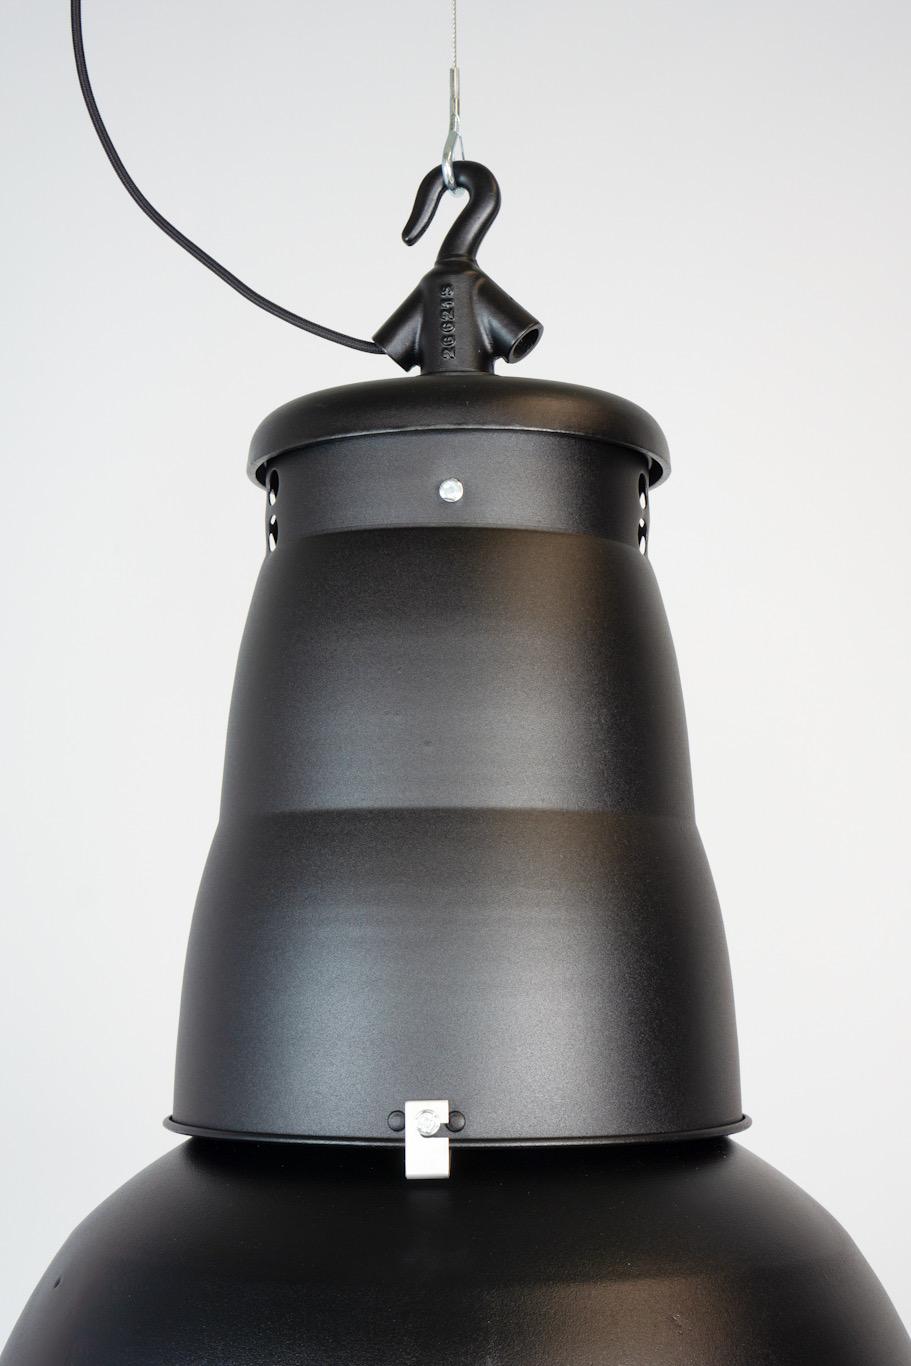 Sandblasted Industrial Hanging Light Pendant Philips PHD400 Black Label Collection 1957 For Sale